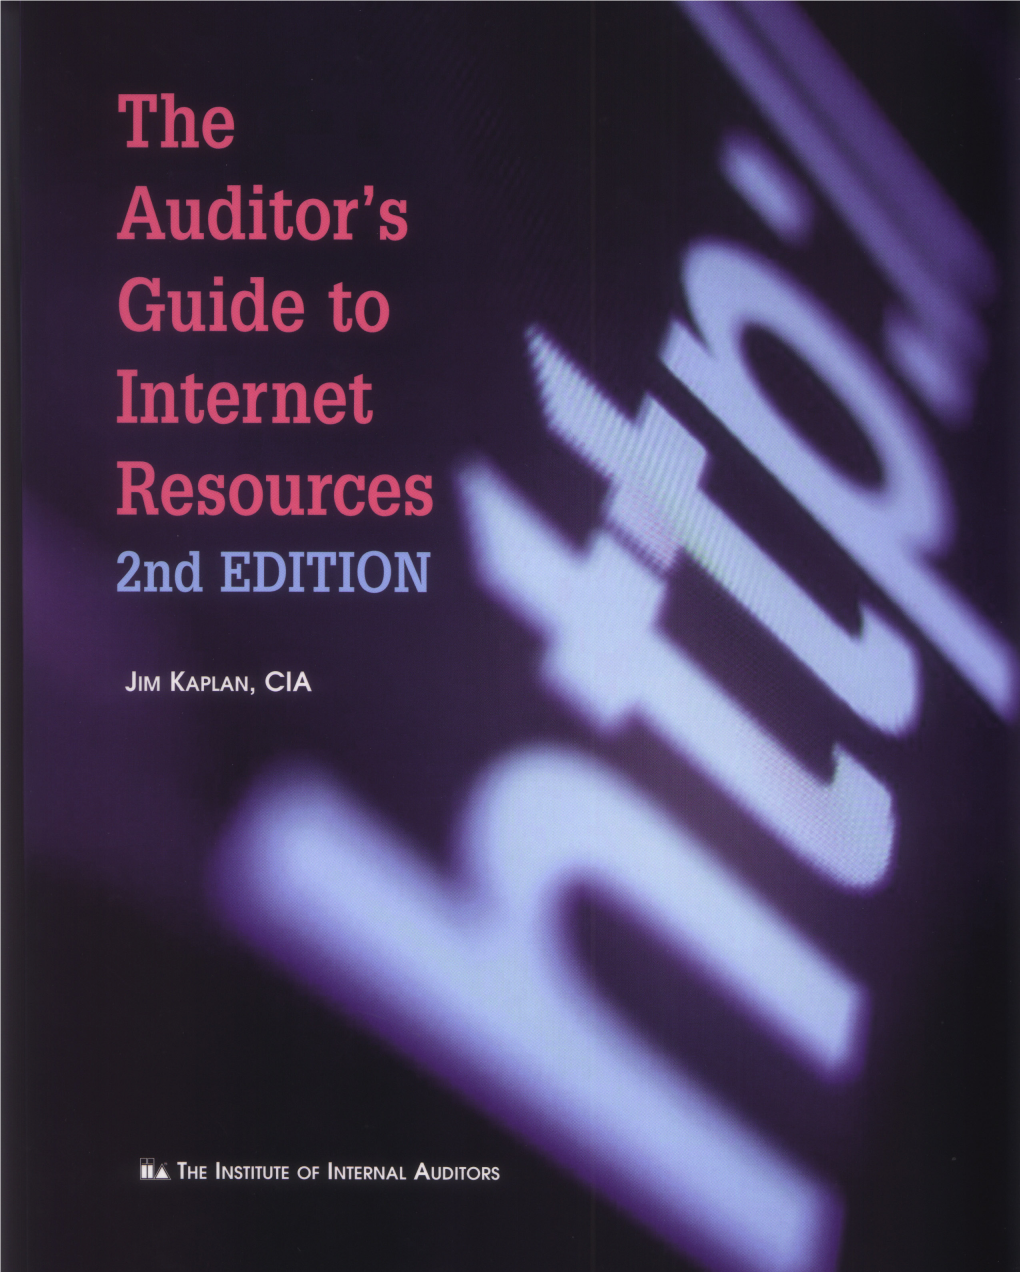 Chapter 1 an Overview of the Internet and Digital Literacy for Auditors